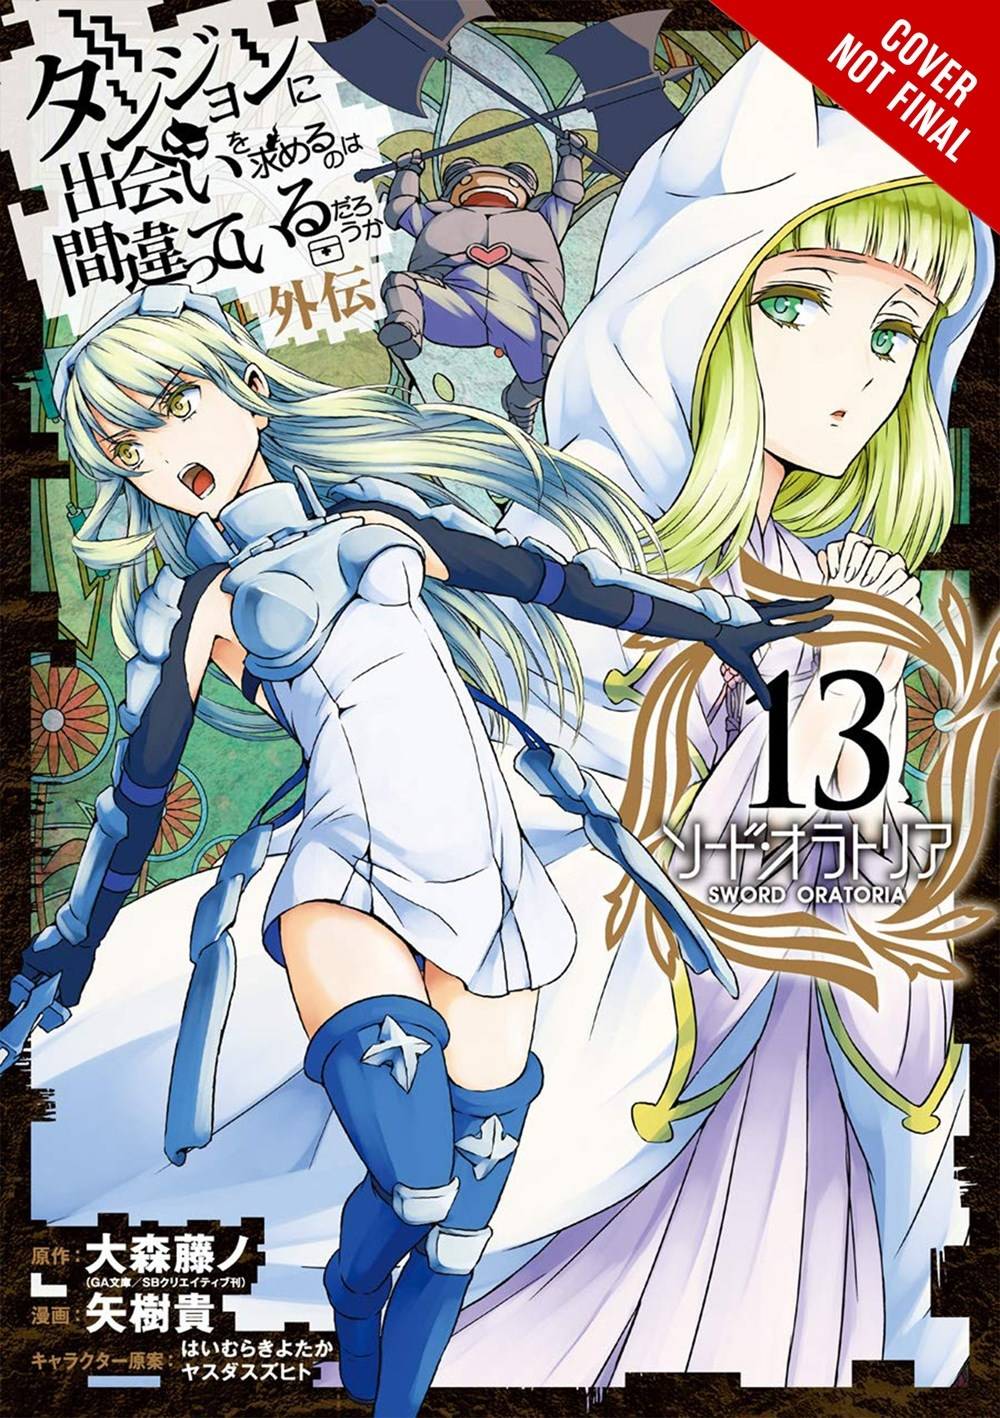 IS WRONG PICK UP GIRLS DUNGEON SWORD ORATORIA GN 13